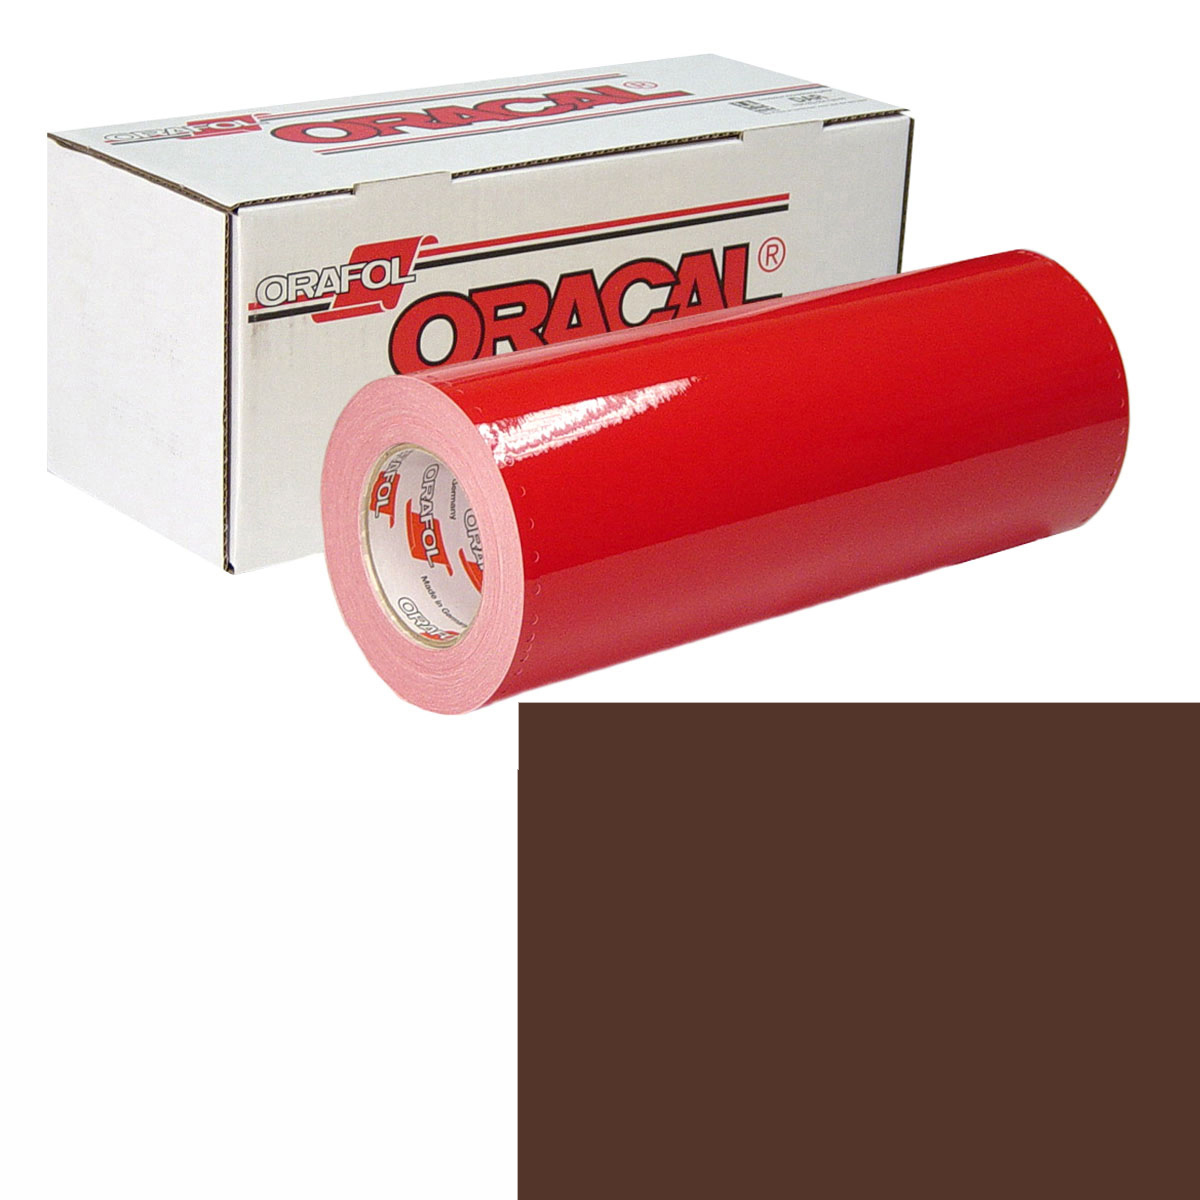 ORACAL 951 Unp 48in X 50yd 810 Cocoa Brown